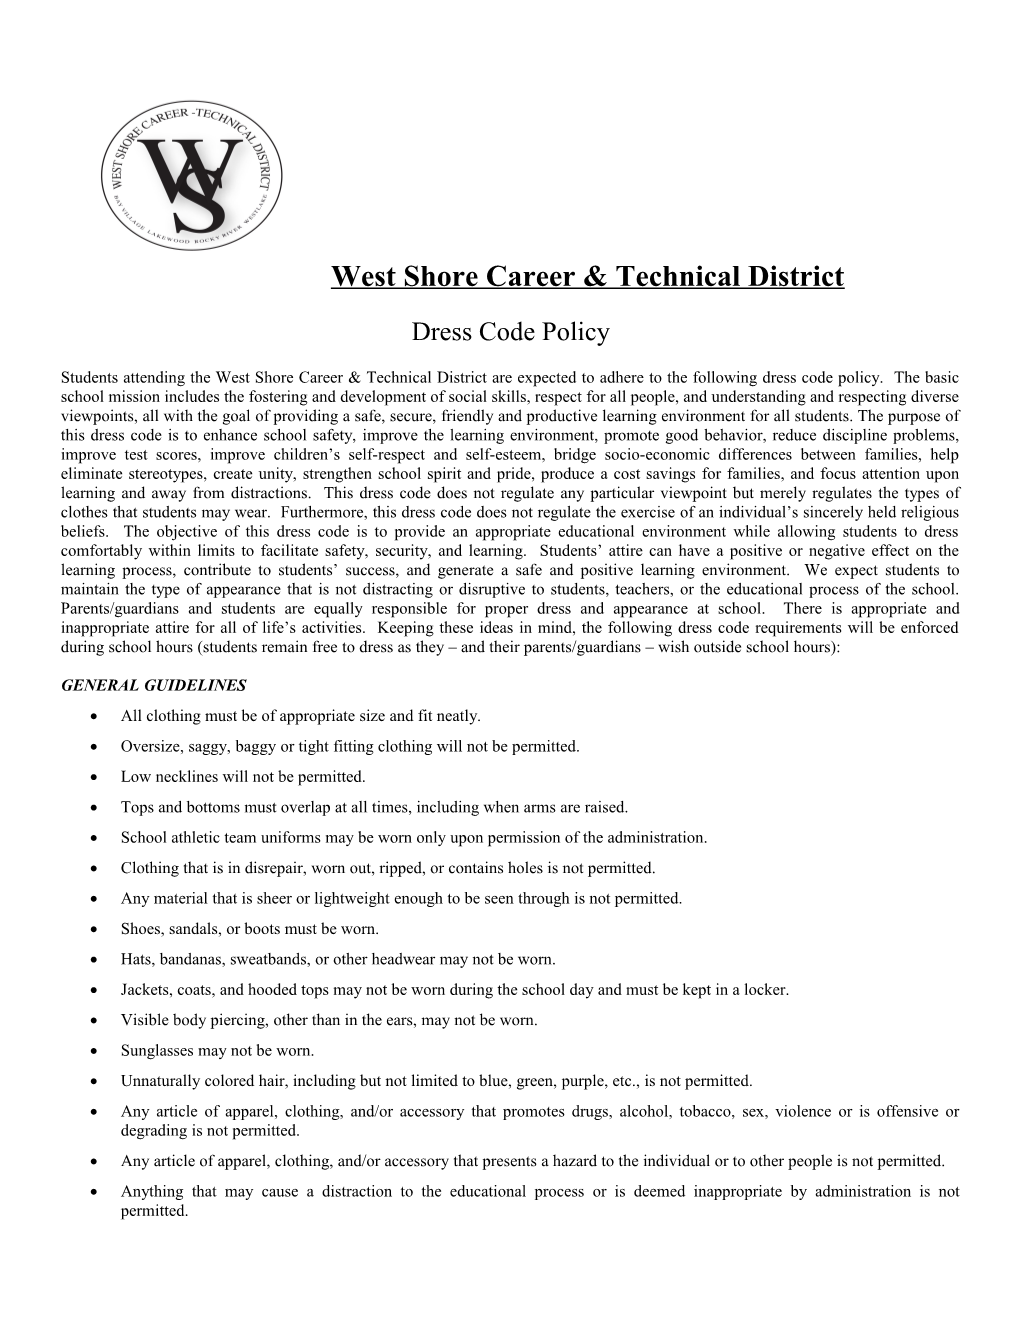 West Shore Career & Technical District